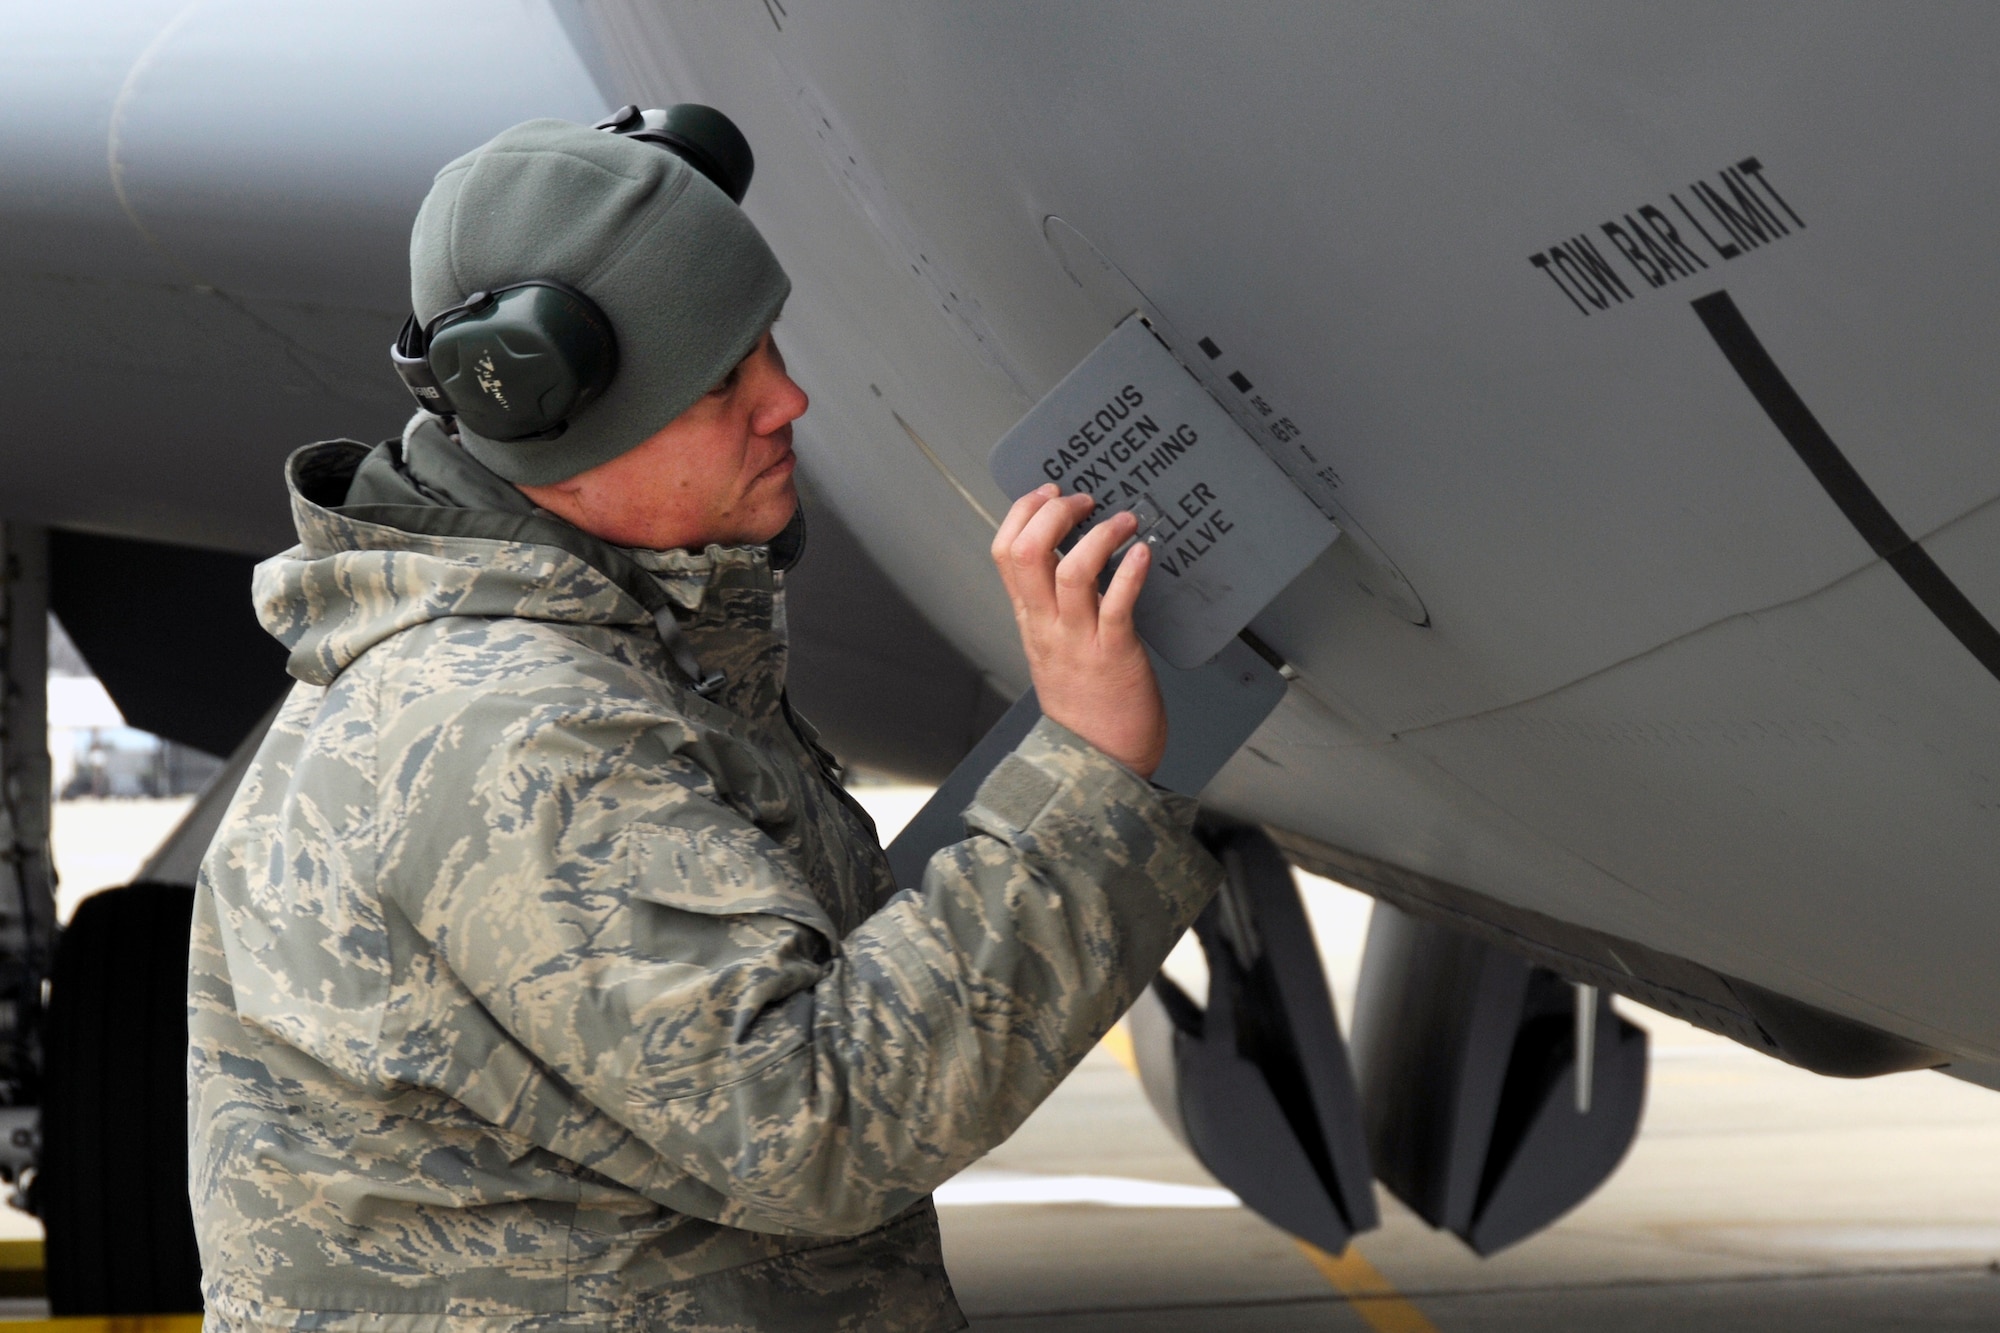 Staff Sgt. Michael Campbell, a crew chief with the 191st Aircraft Maintenance Squadron, performs a pre-flight check on a KC-135 Stratotanker at Selfridge Air National Guard Base, Mich., Dec. 3, 2011. Crew chiefs perform and coordinate a wide variety of maintenance tasks and prepare the aircraft for flight. (U.S. Air Force photo by TSgt. David Kujawa)